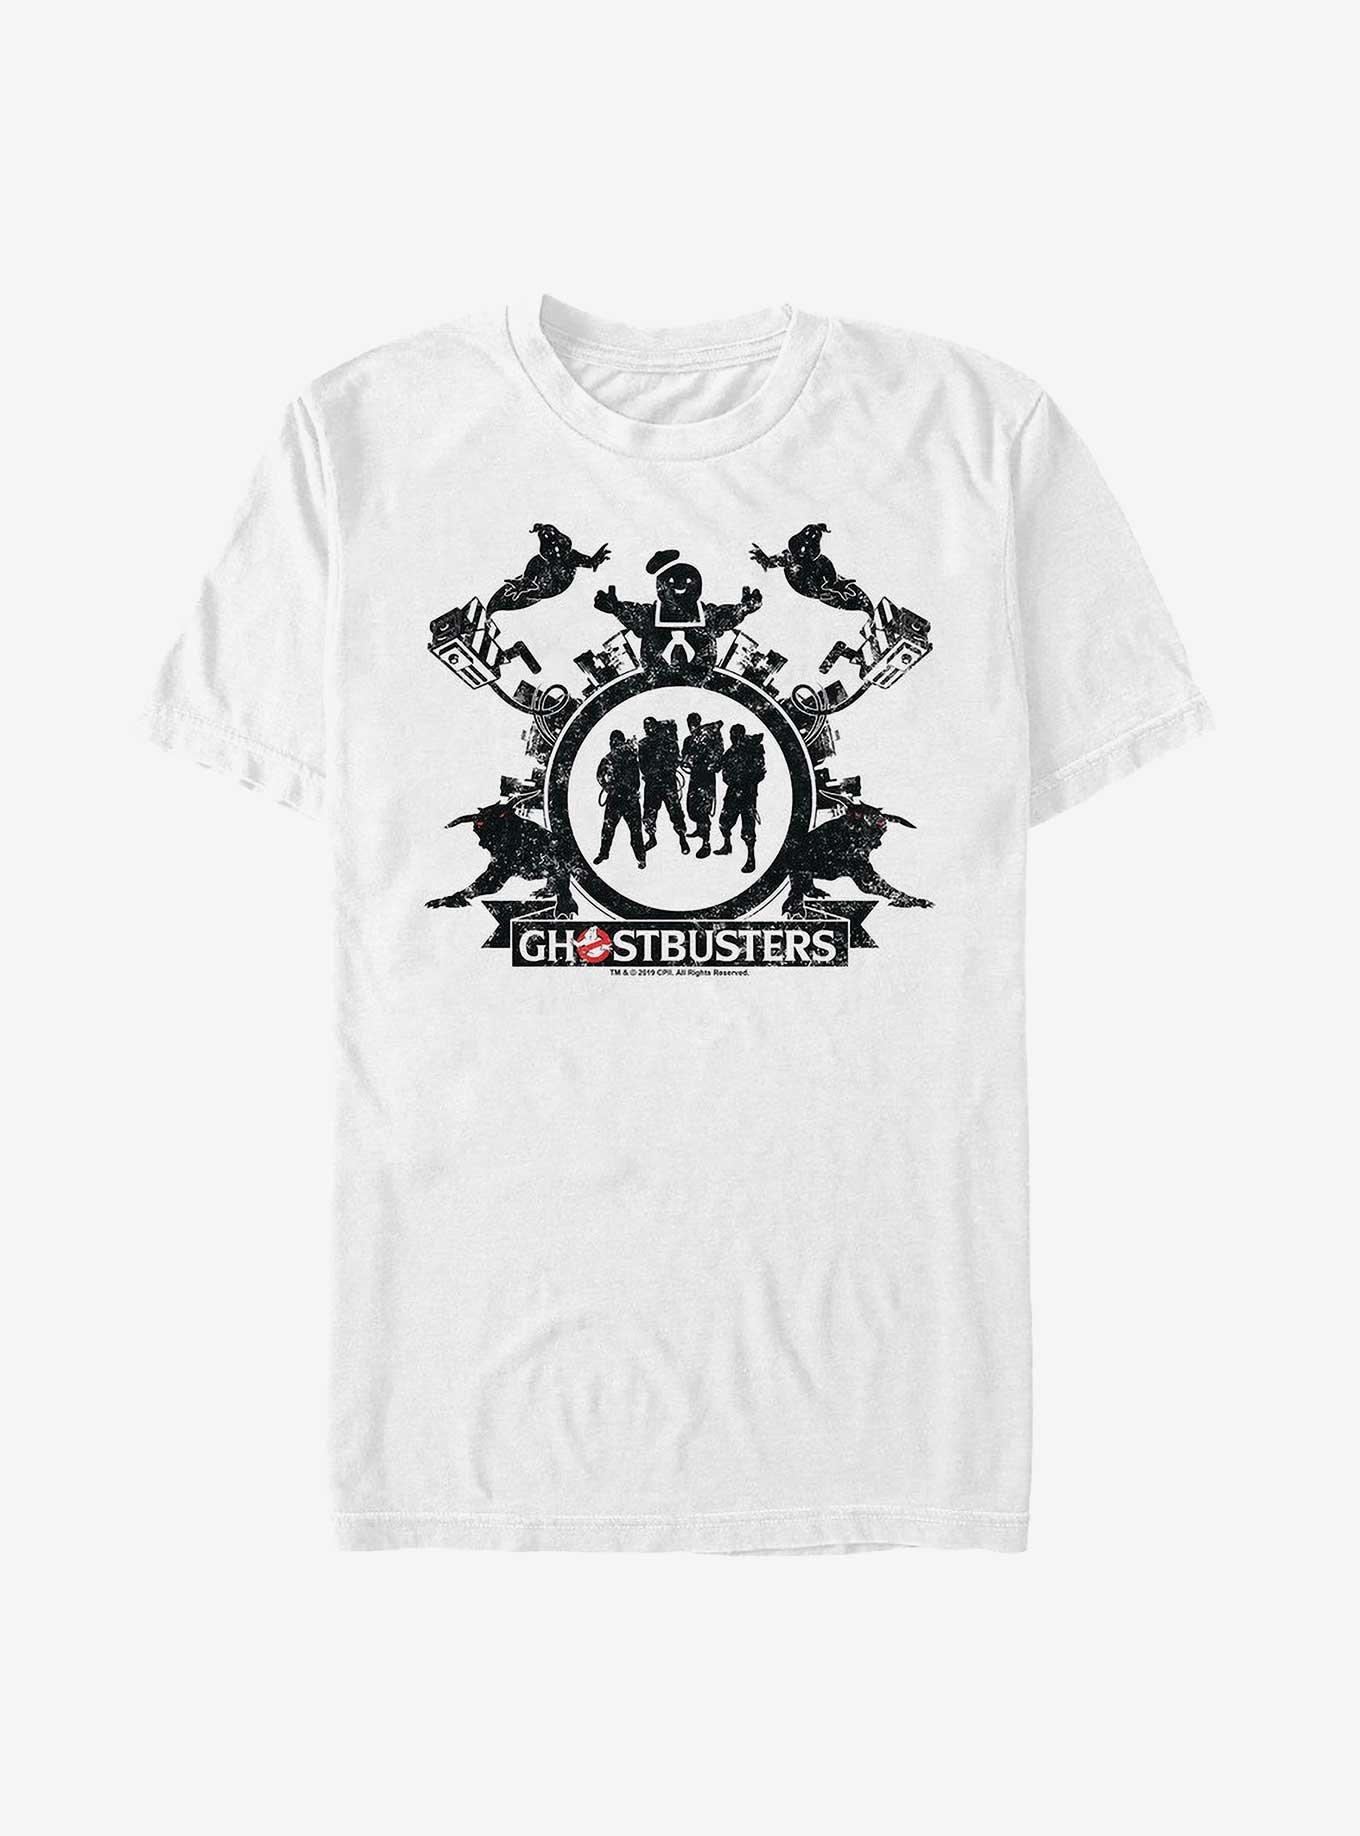 Ghostbusters Ghostbusting Squad T-Shirt